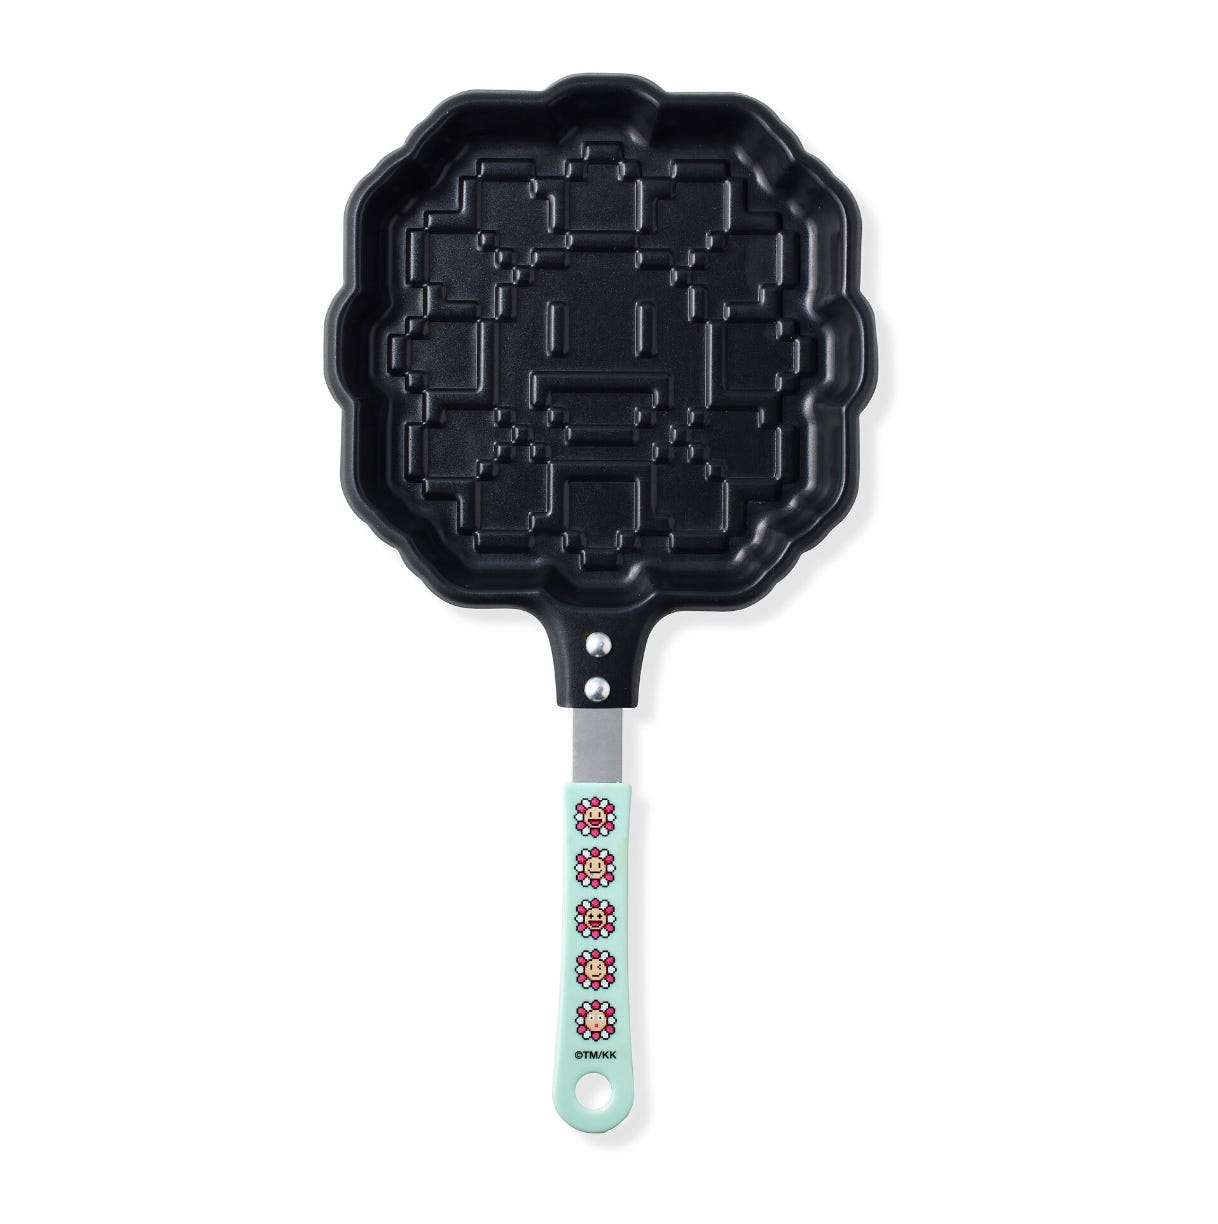 A small stainless steel pan with. raised outline of Murakami’s most famous motif, the flower, so that every pancake you cook will be indented with this smiling icon. The pan features a cute and colorful resin handle printed with five flowers.